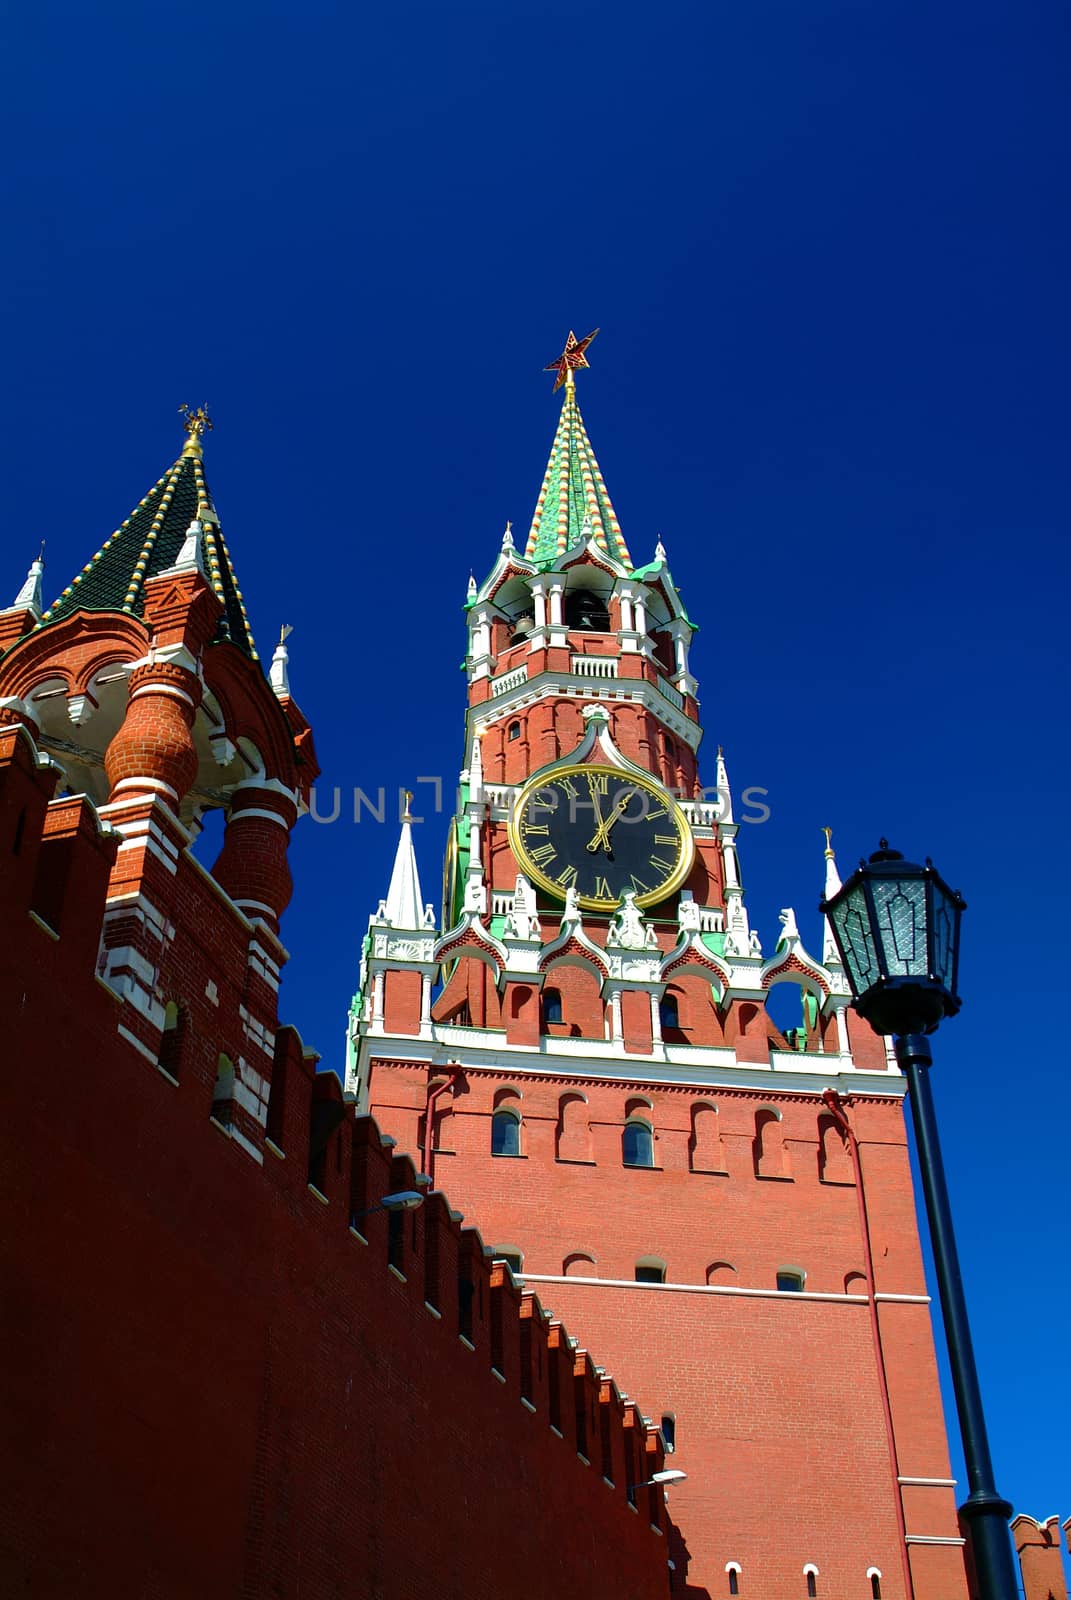 View on Moscow Red Square Kremlin tower Spasskaya Bashnya with Chiming Kuranti Clock. Moscow Kremlin Red Square best famous sightseeing places for tourist holidays vacations tours. Famous monuments by mikhail_leonov